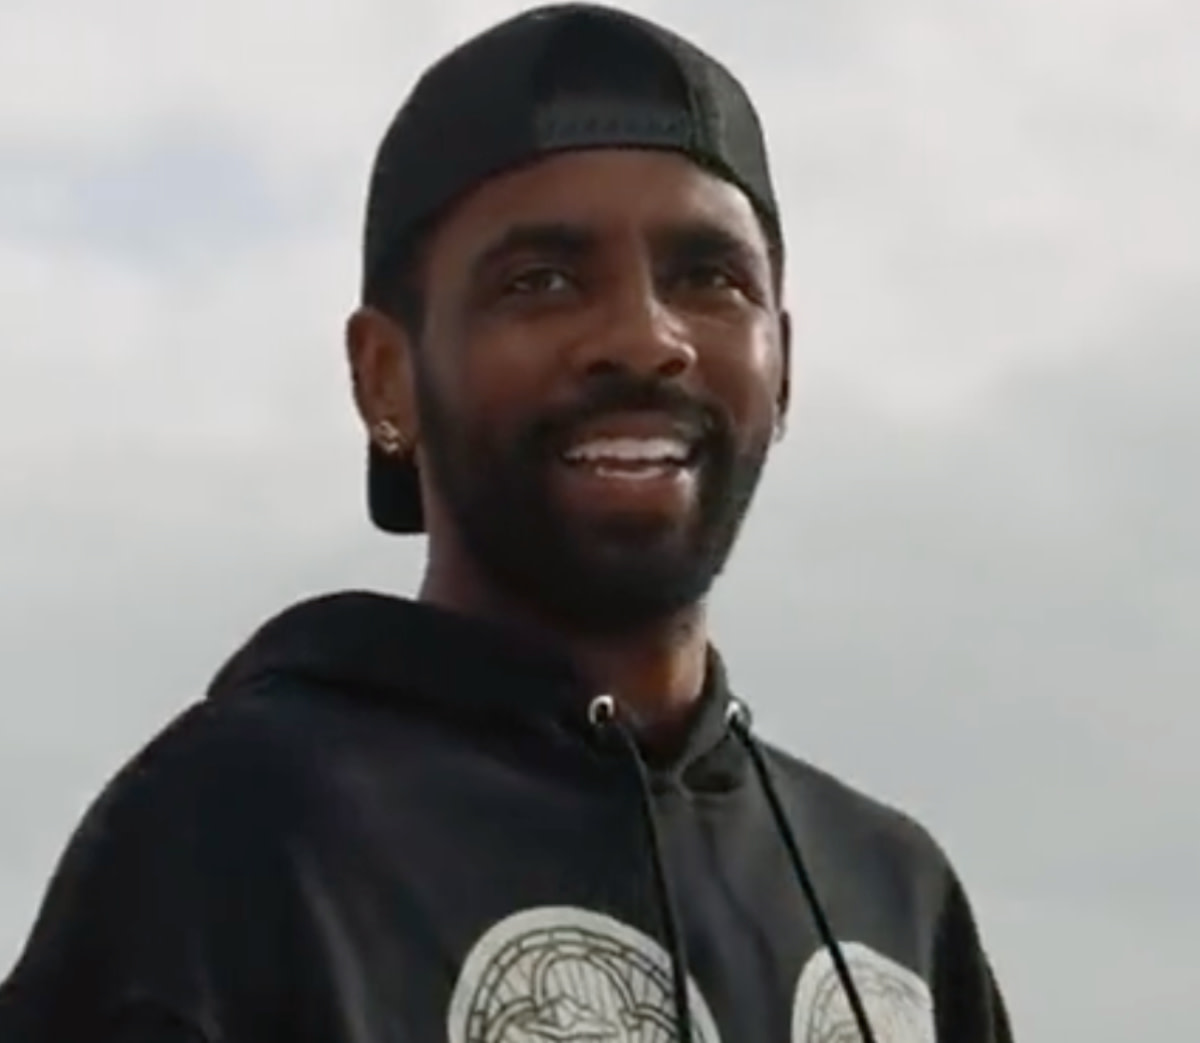 Kyrie Irving Shares A Wholesome But Vague Message After Picking Up His Player Option With The Nets: "Struggle Is Part Of The Journey. But Suppressing Your Voice And Suppressing Your Feelings Is Not."